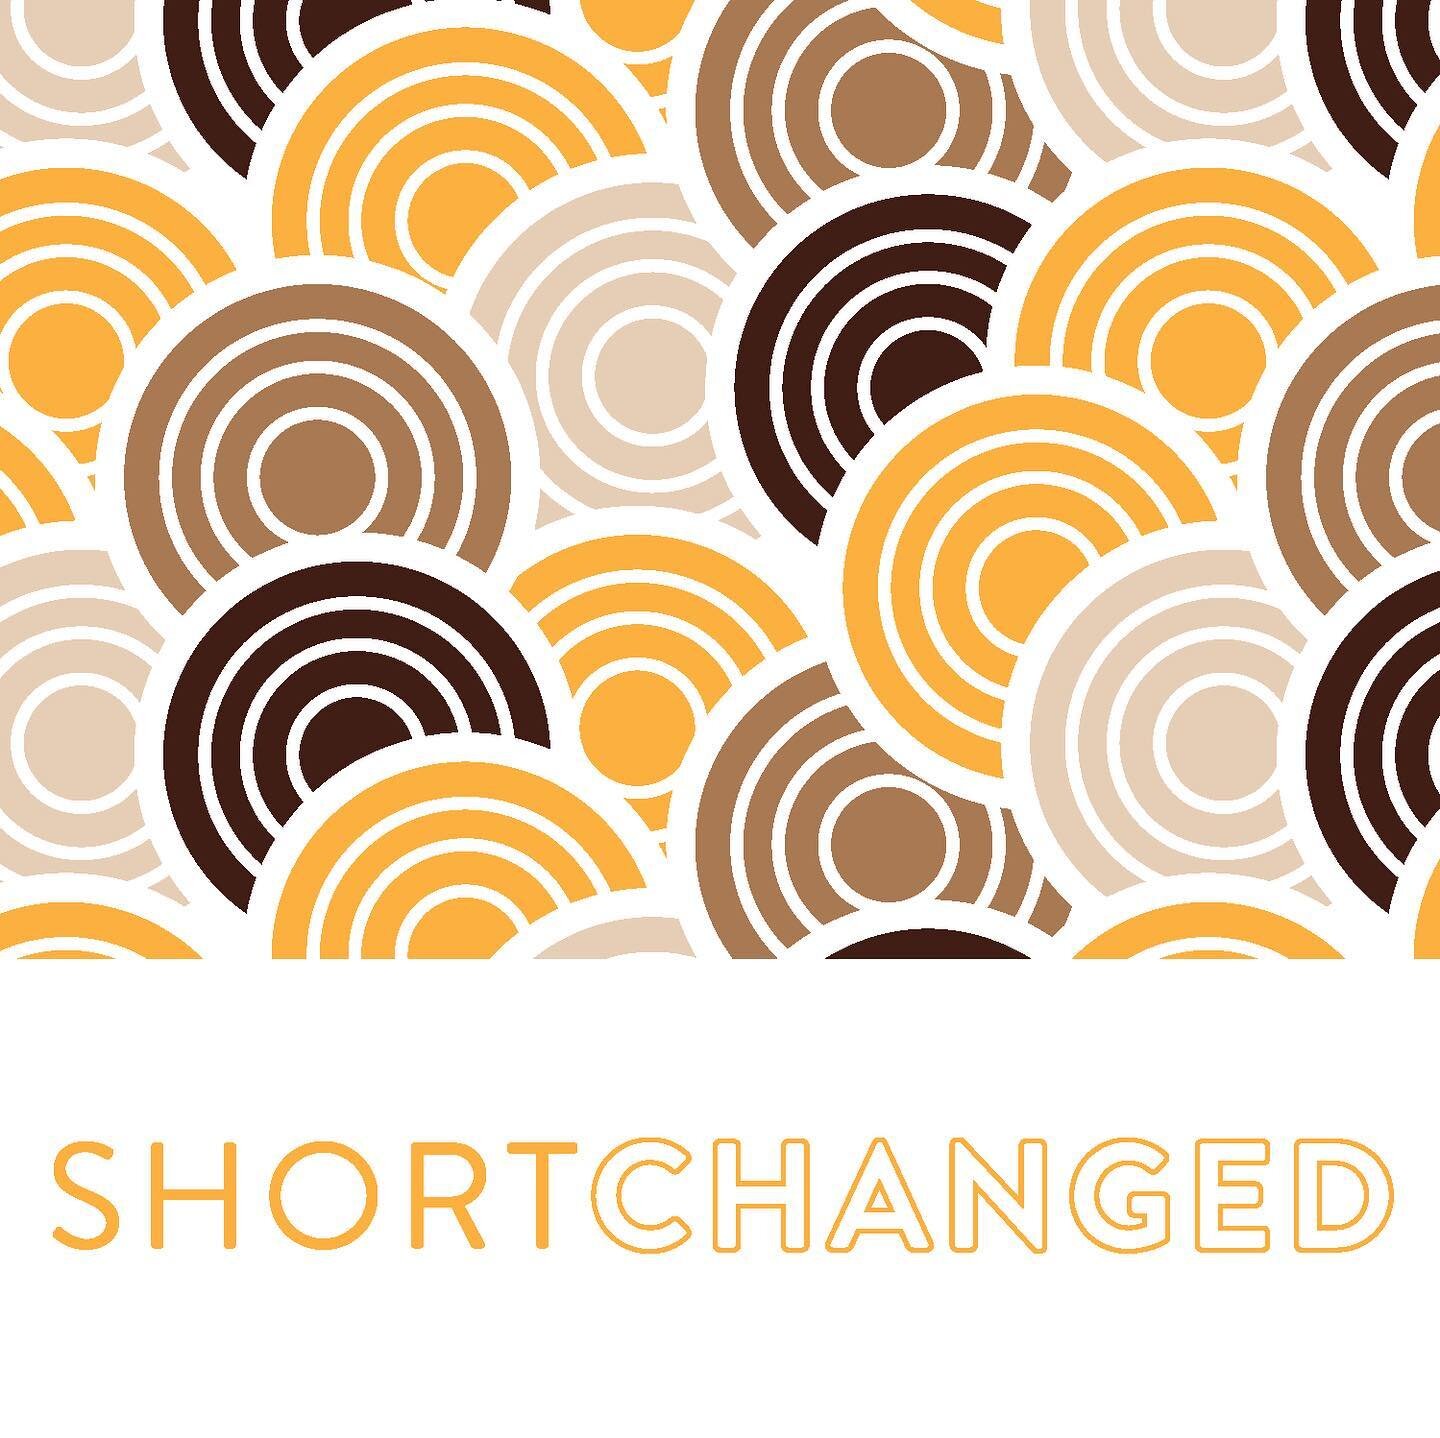 You may have been hearing whispers of a podcast coming✨&hellip; With some mighty encouragement, generous wisdom, and powerful conversations, the Shortchanged Podcast hosted by @moniquedanae_  and @taylorenjohnson is HERE! 

Well, almost here! Mark Ma